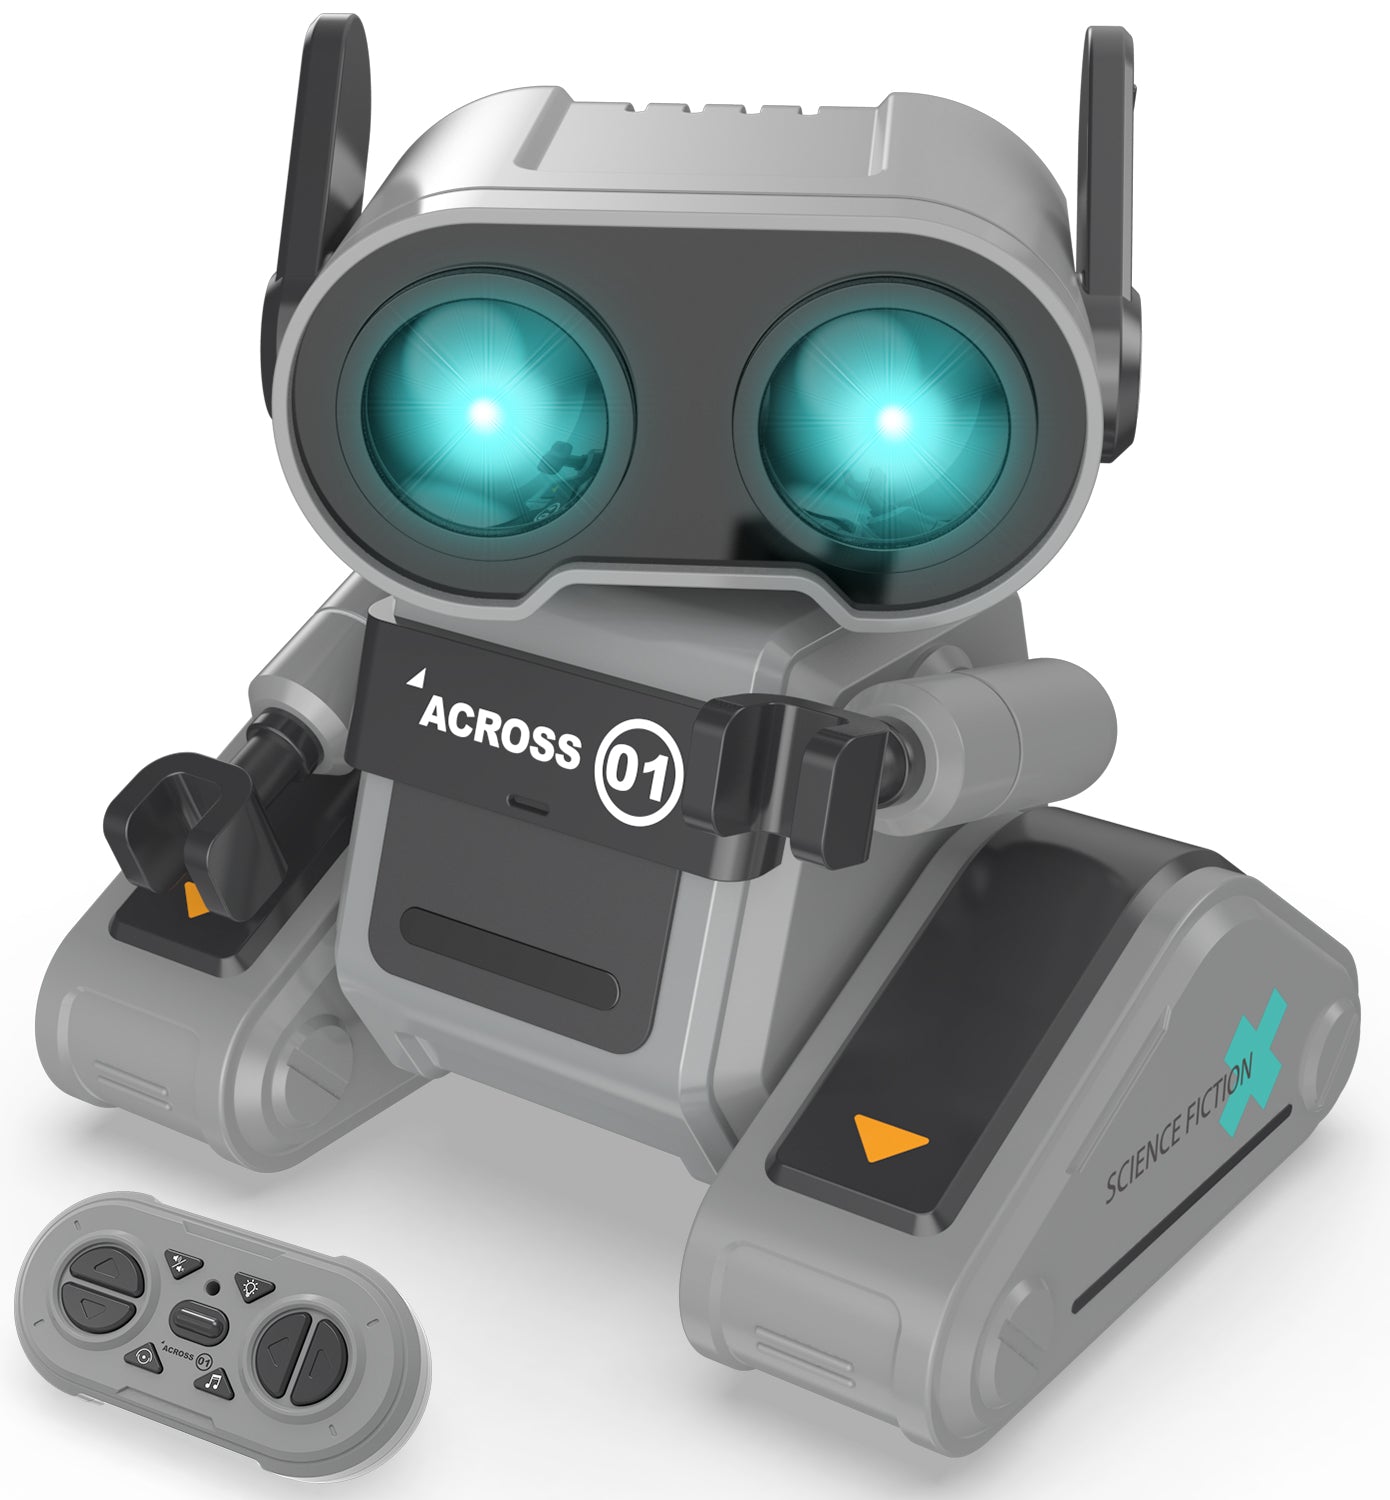 STEMTRON Rechargeable RC Robot Toys with Auto Demo, Dance Moves, Music for Kids (Black)